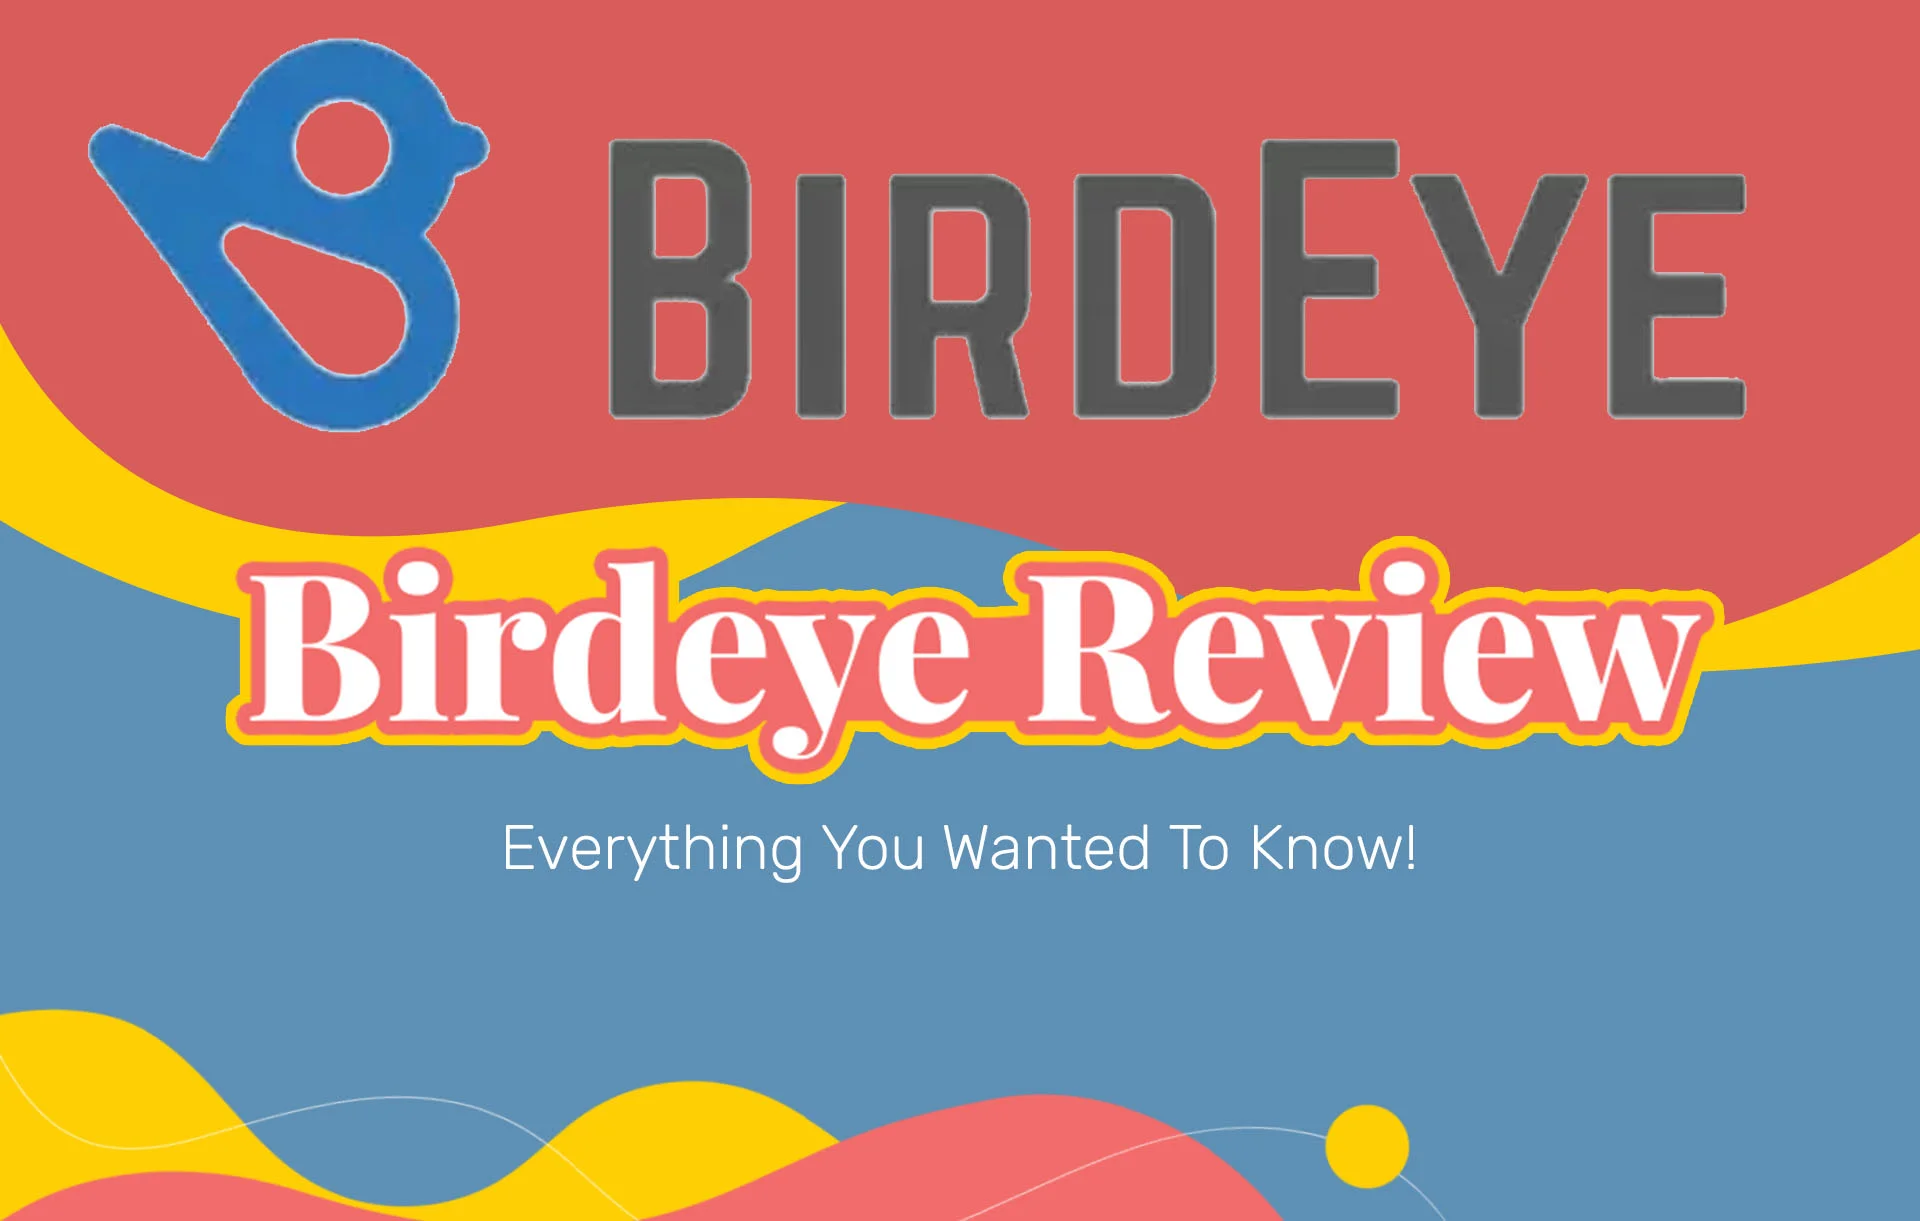 Birdeye Reviews: Everything You Wanted To Know!